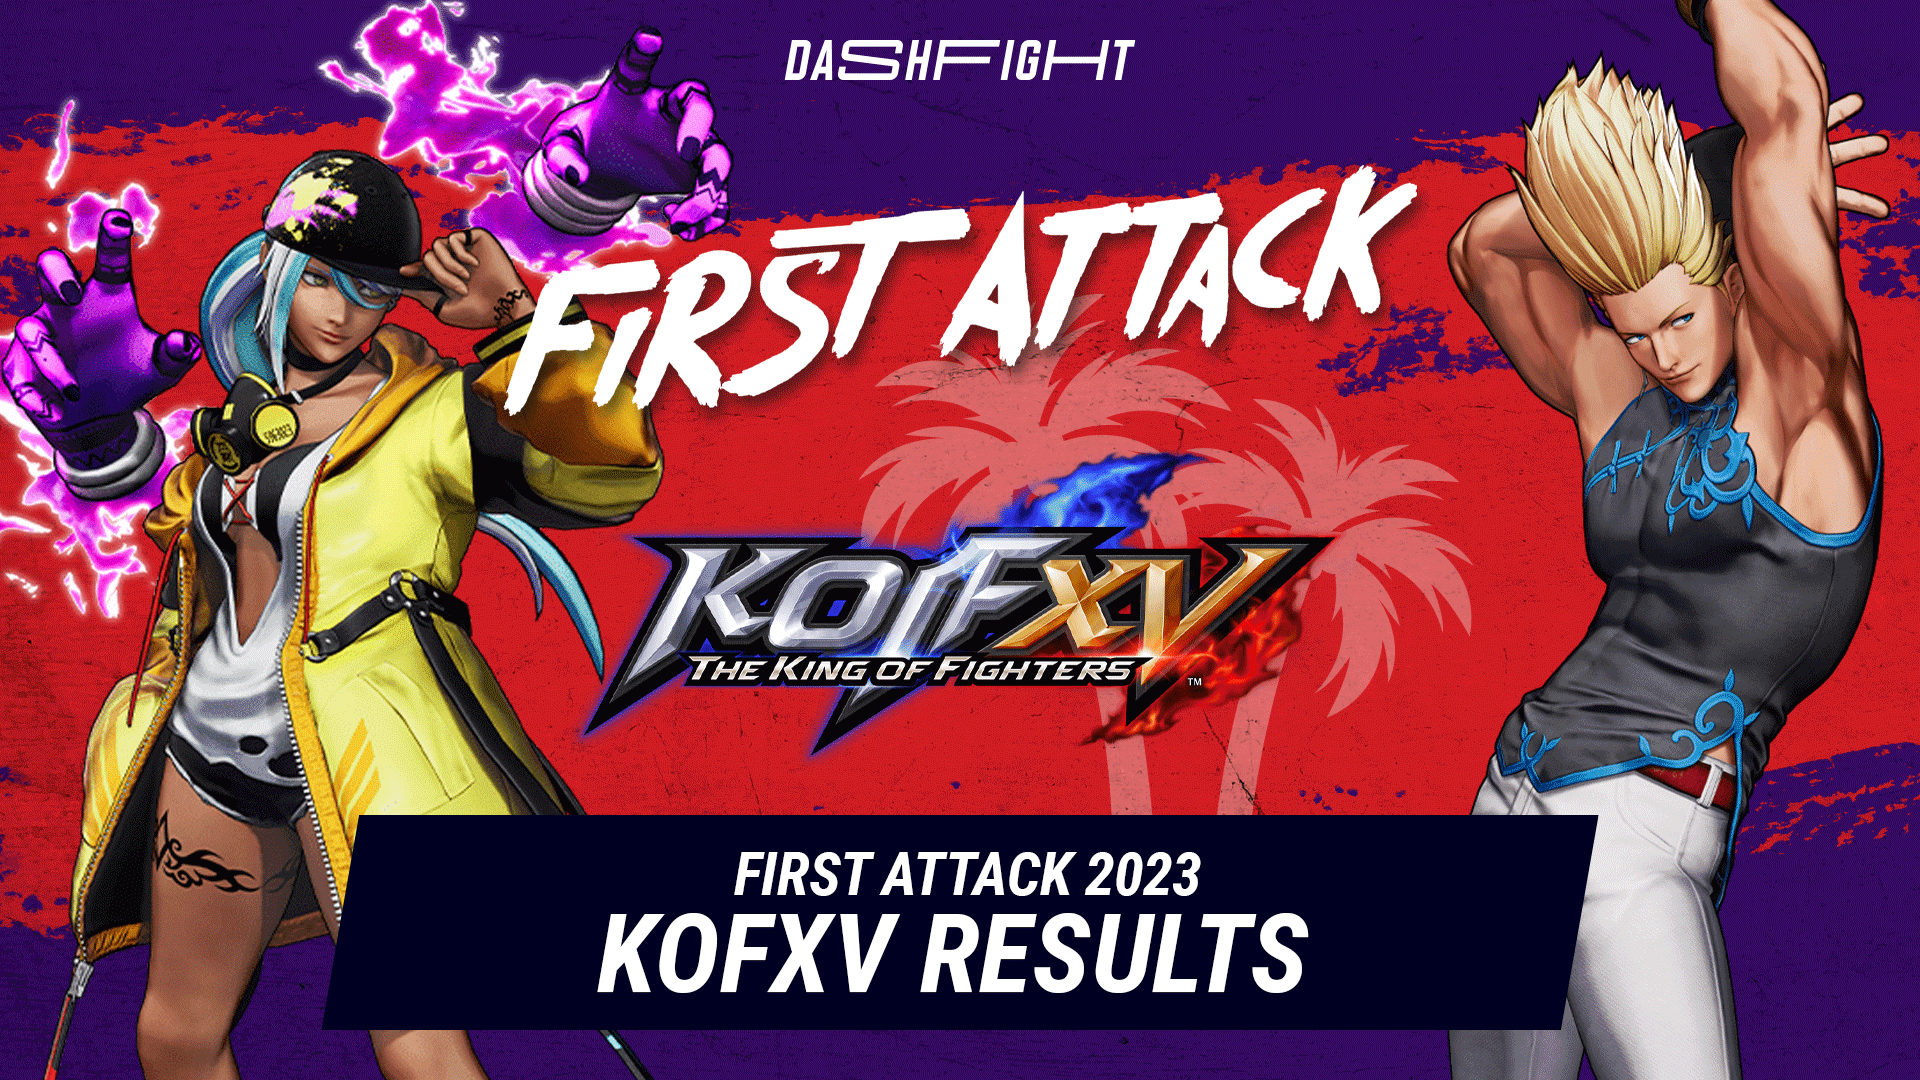 King of Fighters 15 Update 1.02 Brings Fighter Changes This February 18